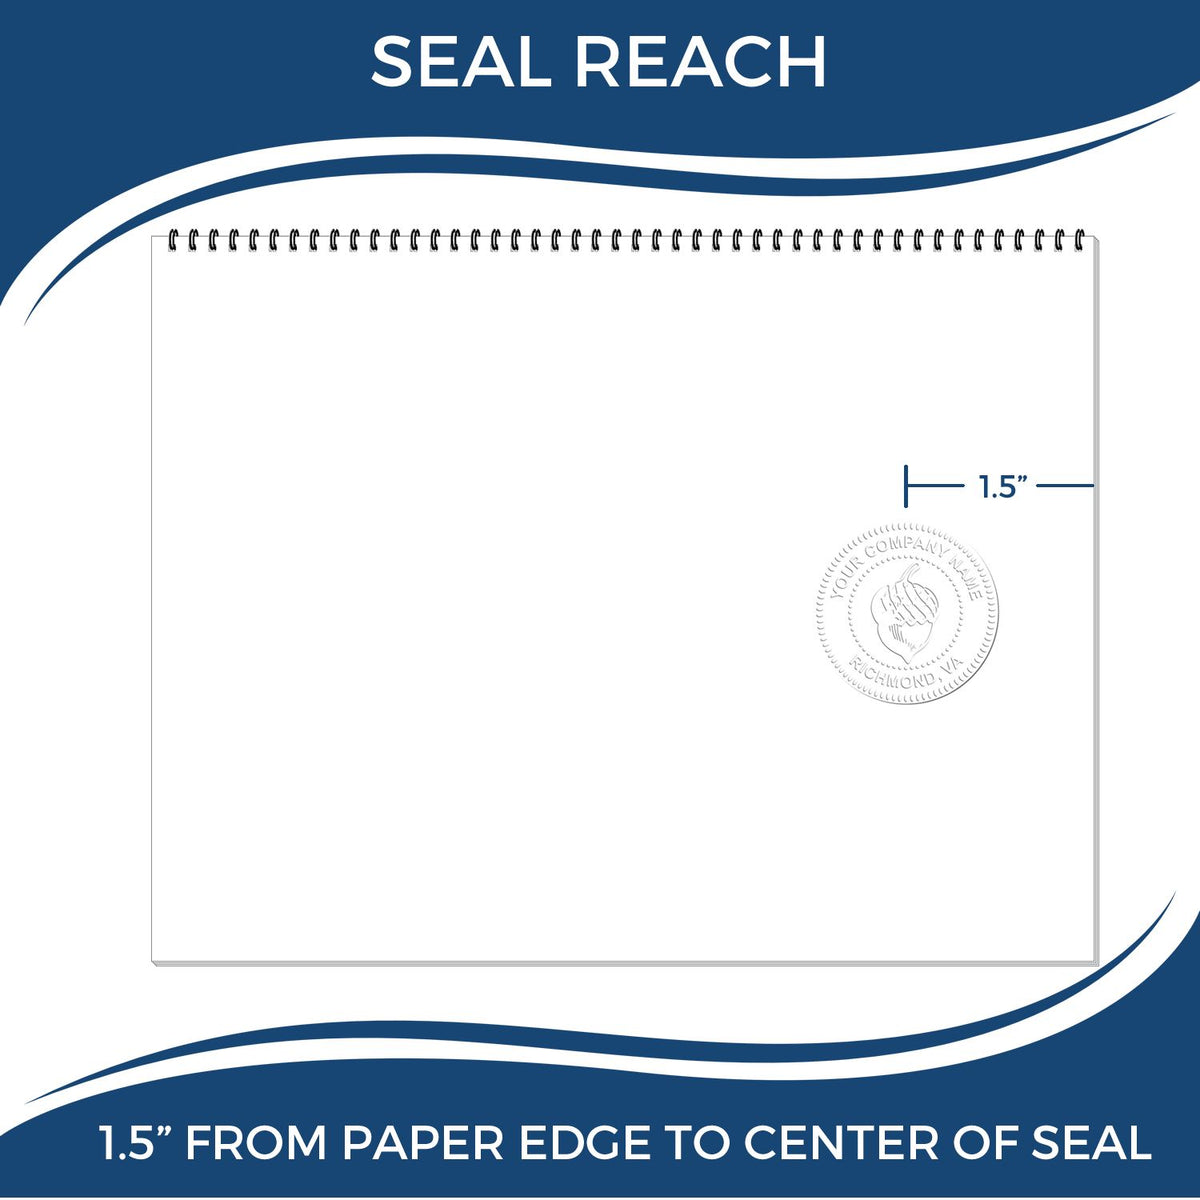 An infographic showing the seal reach which is represented by a ruler and a miniature seal image of the Handheld South Carolina Professional Engineer Embosser